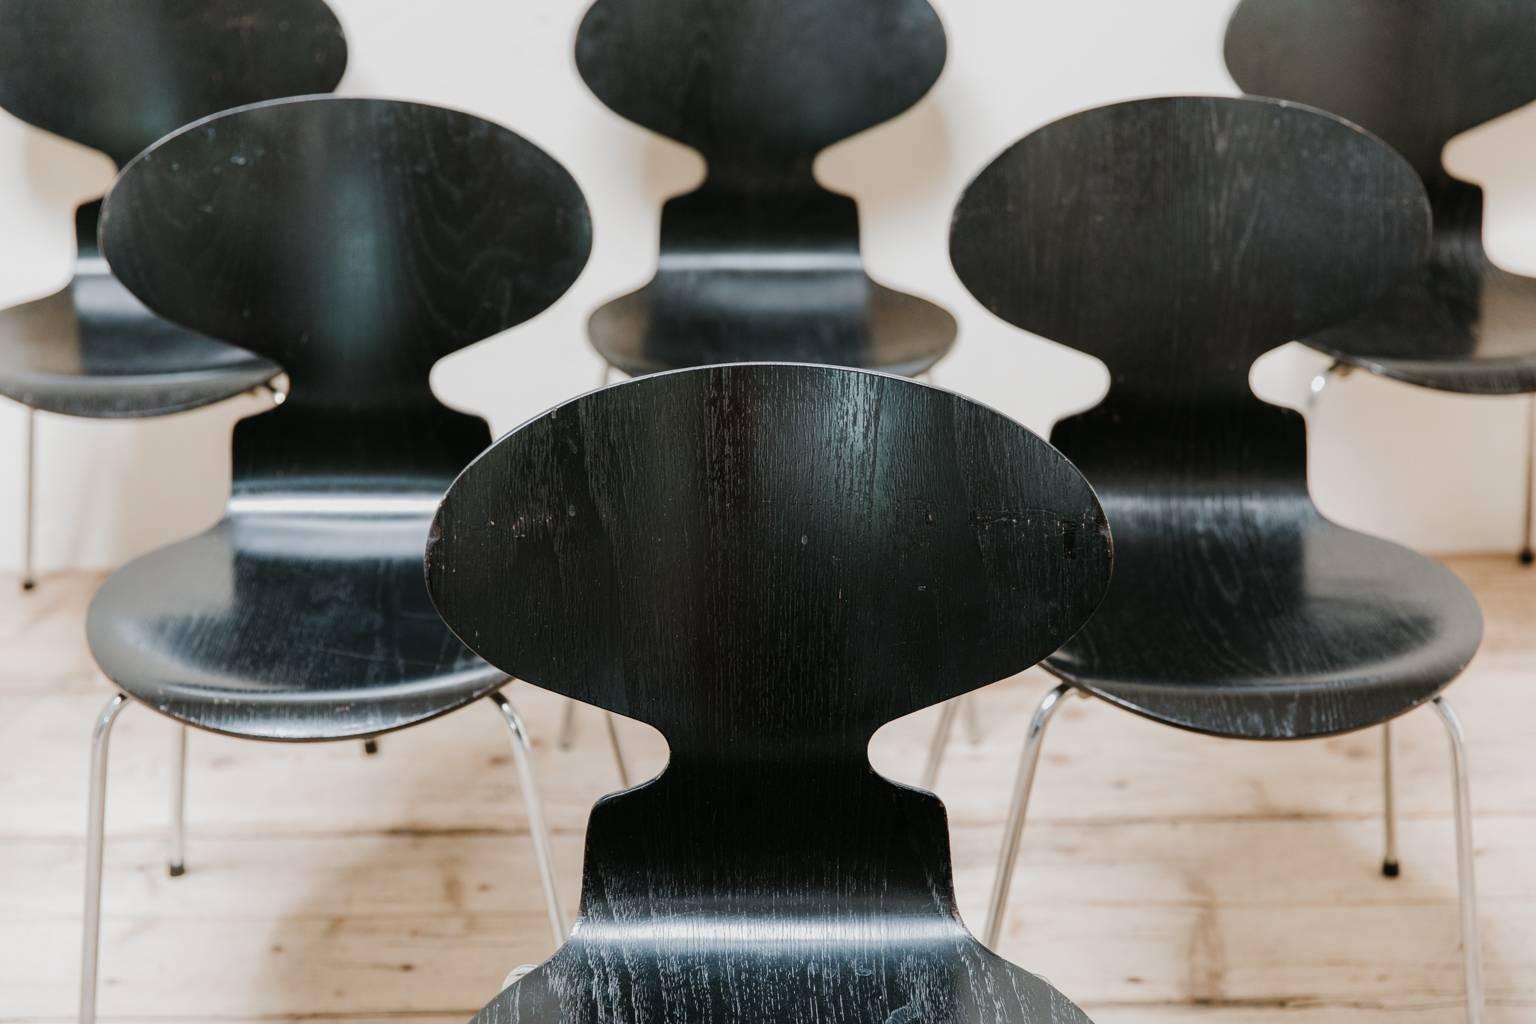 A set of six ant chairs by Arne Jacobsen for Fritz Hansen, Danish design.
Despite its minimalistic form and graceful shape, the Arne Jacobsen chair, The Ant, is an extraordinarily comfortable chair, this set is labelled and dated 1989.